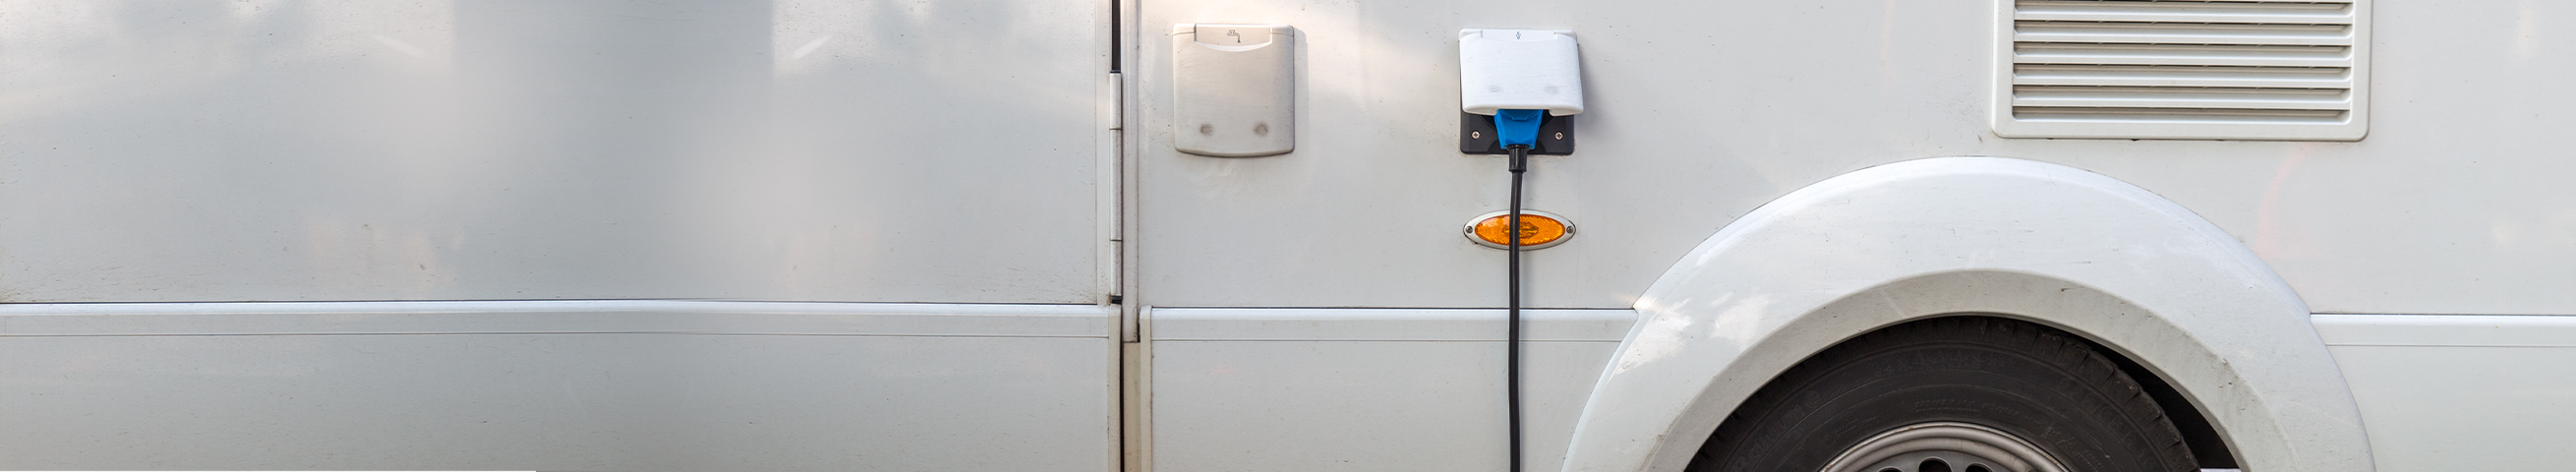 How to use a Caravan Without an Electric Hook up